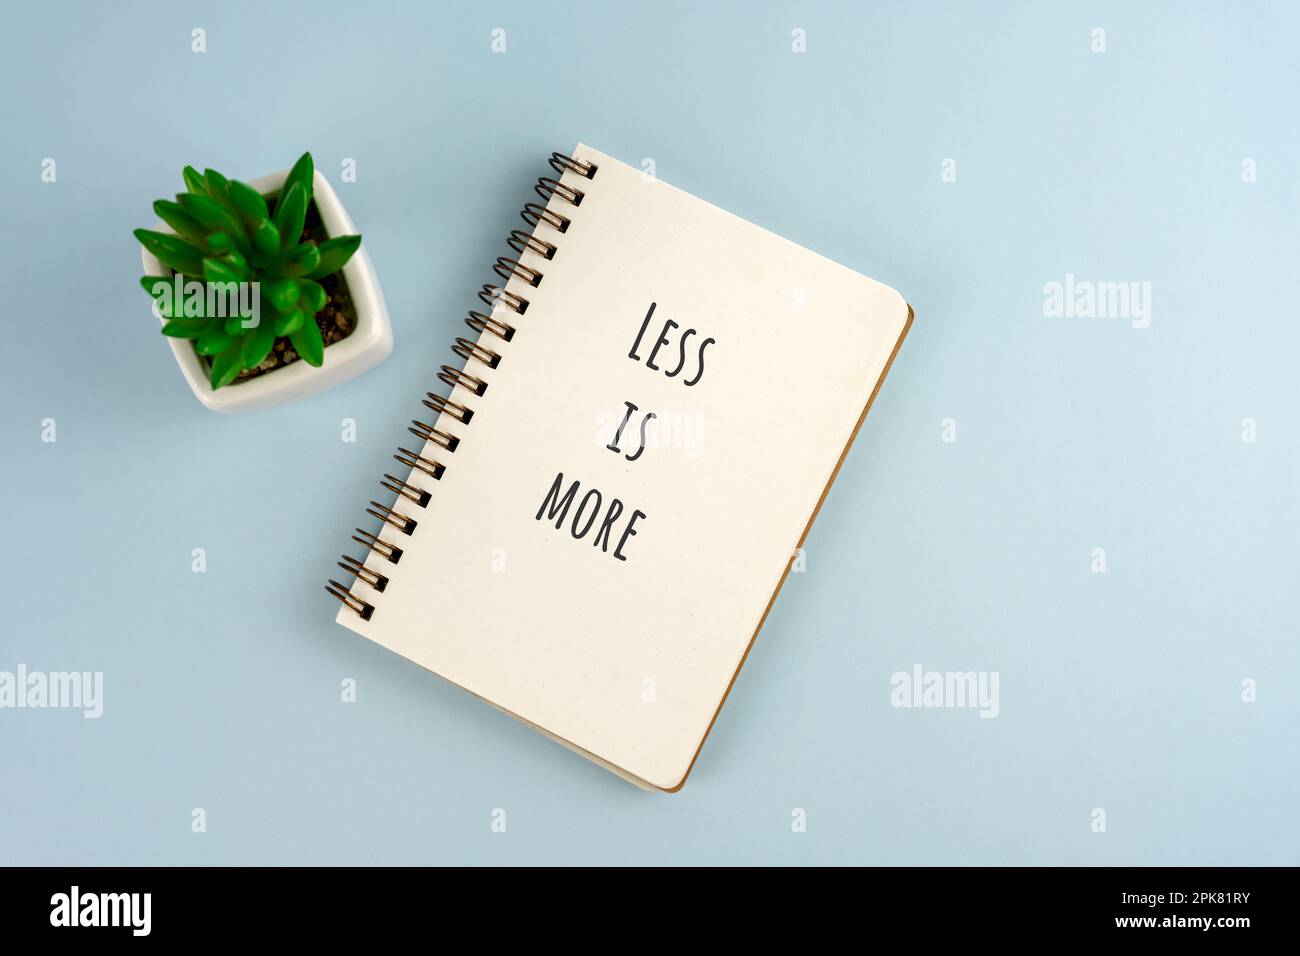 Less me more inspirational quotes text on notepad Stock Photo